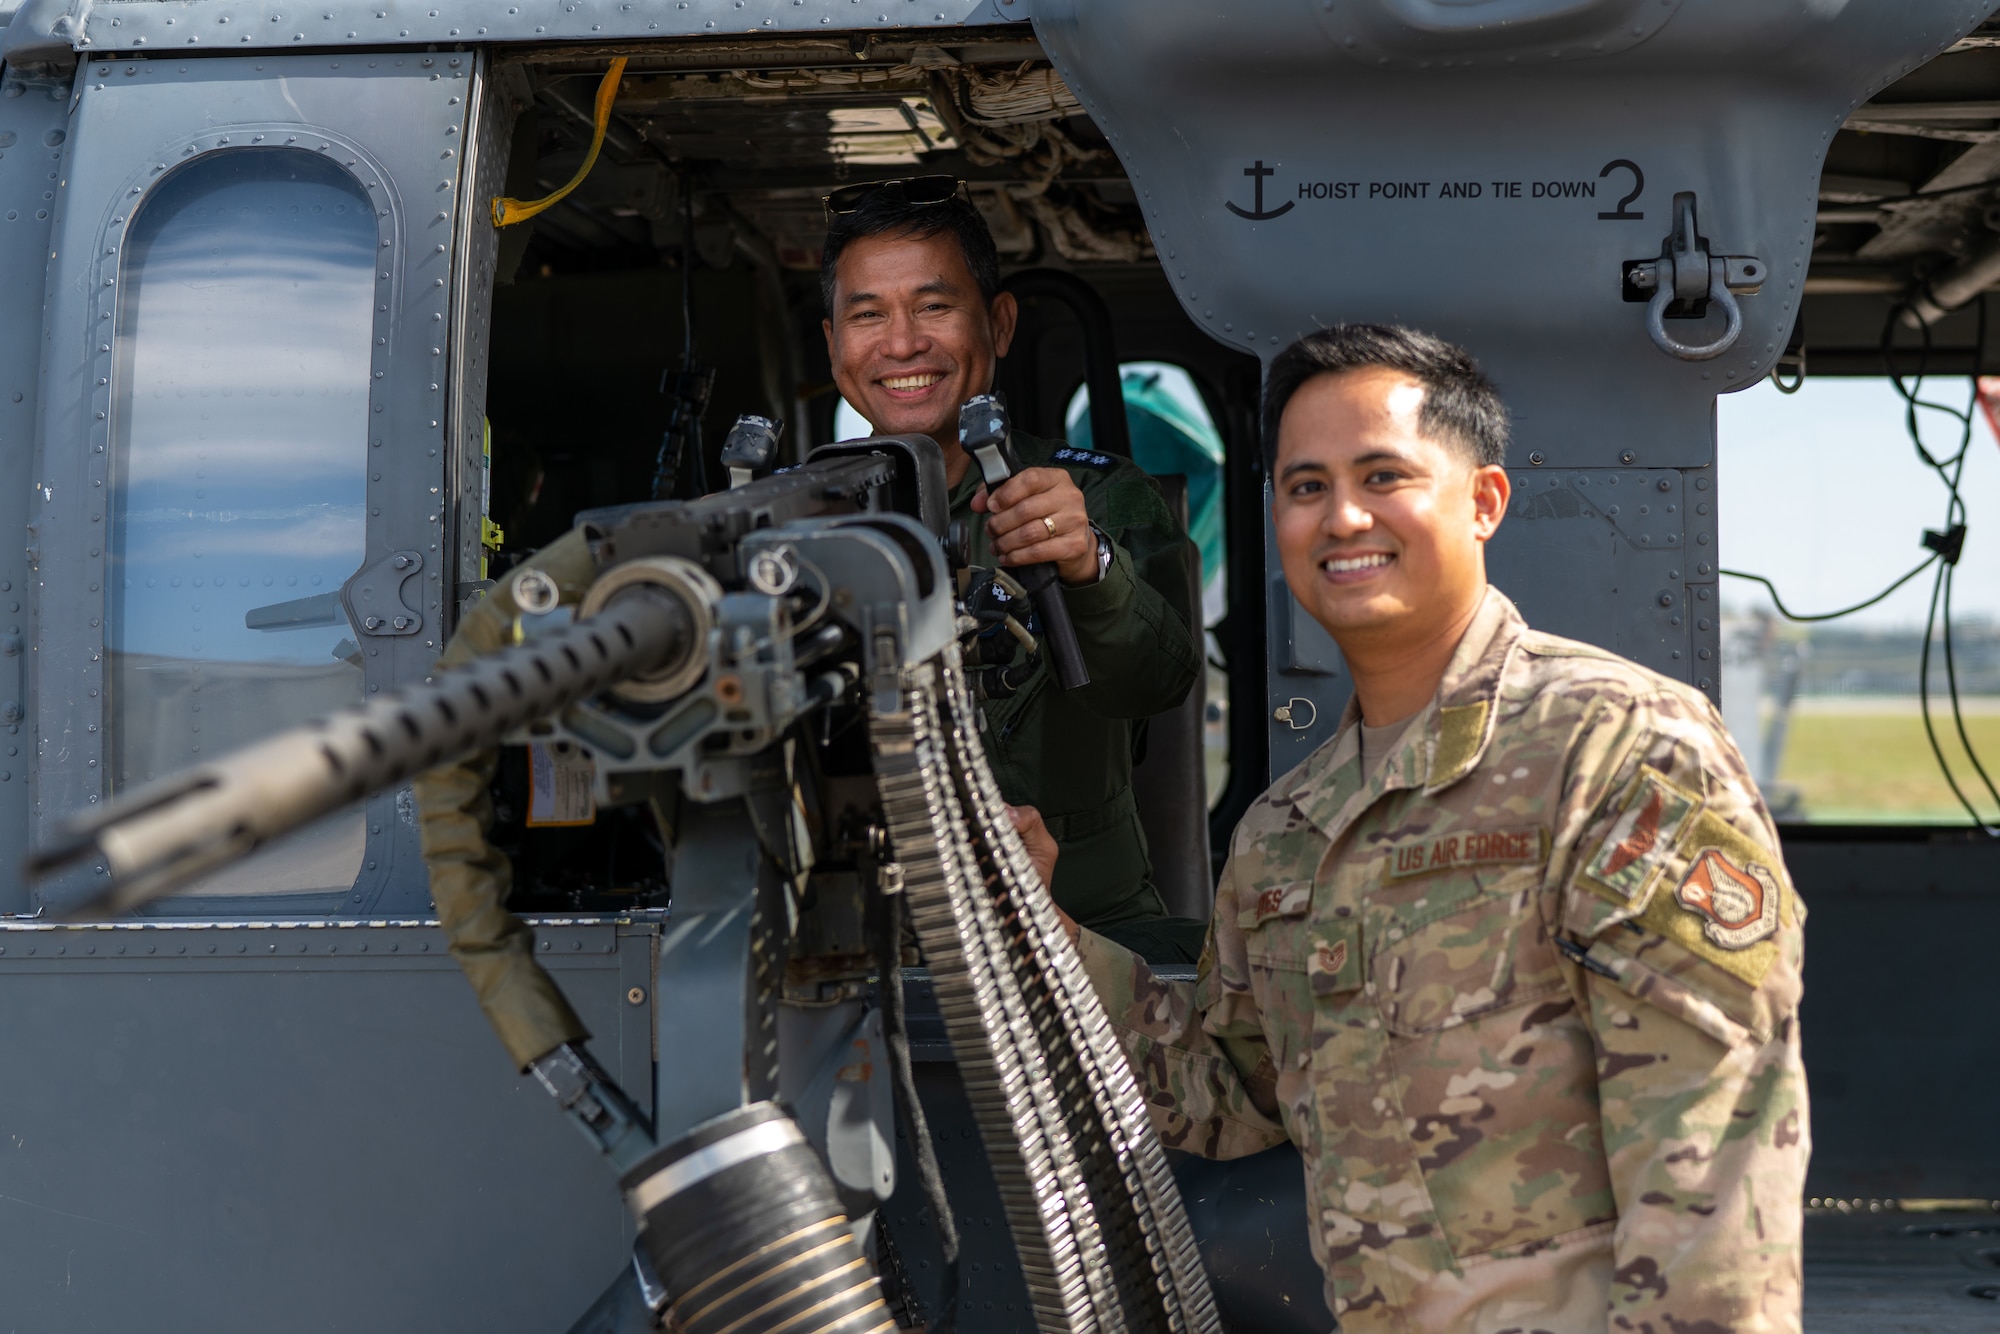 A Philippine Air Force member and an Airman pose for a photo.